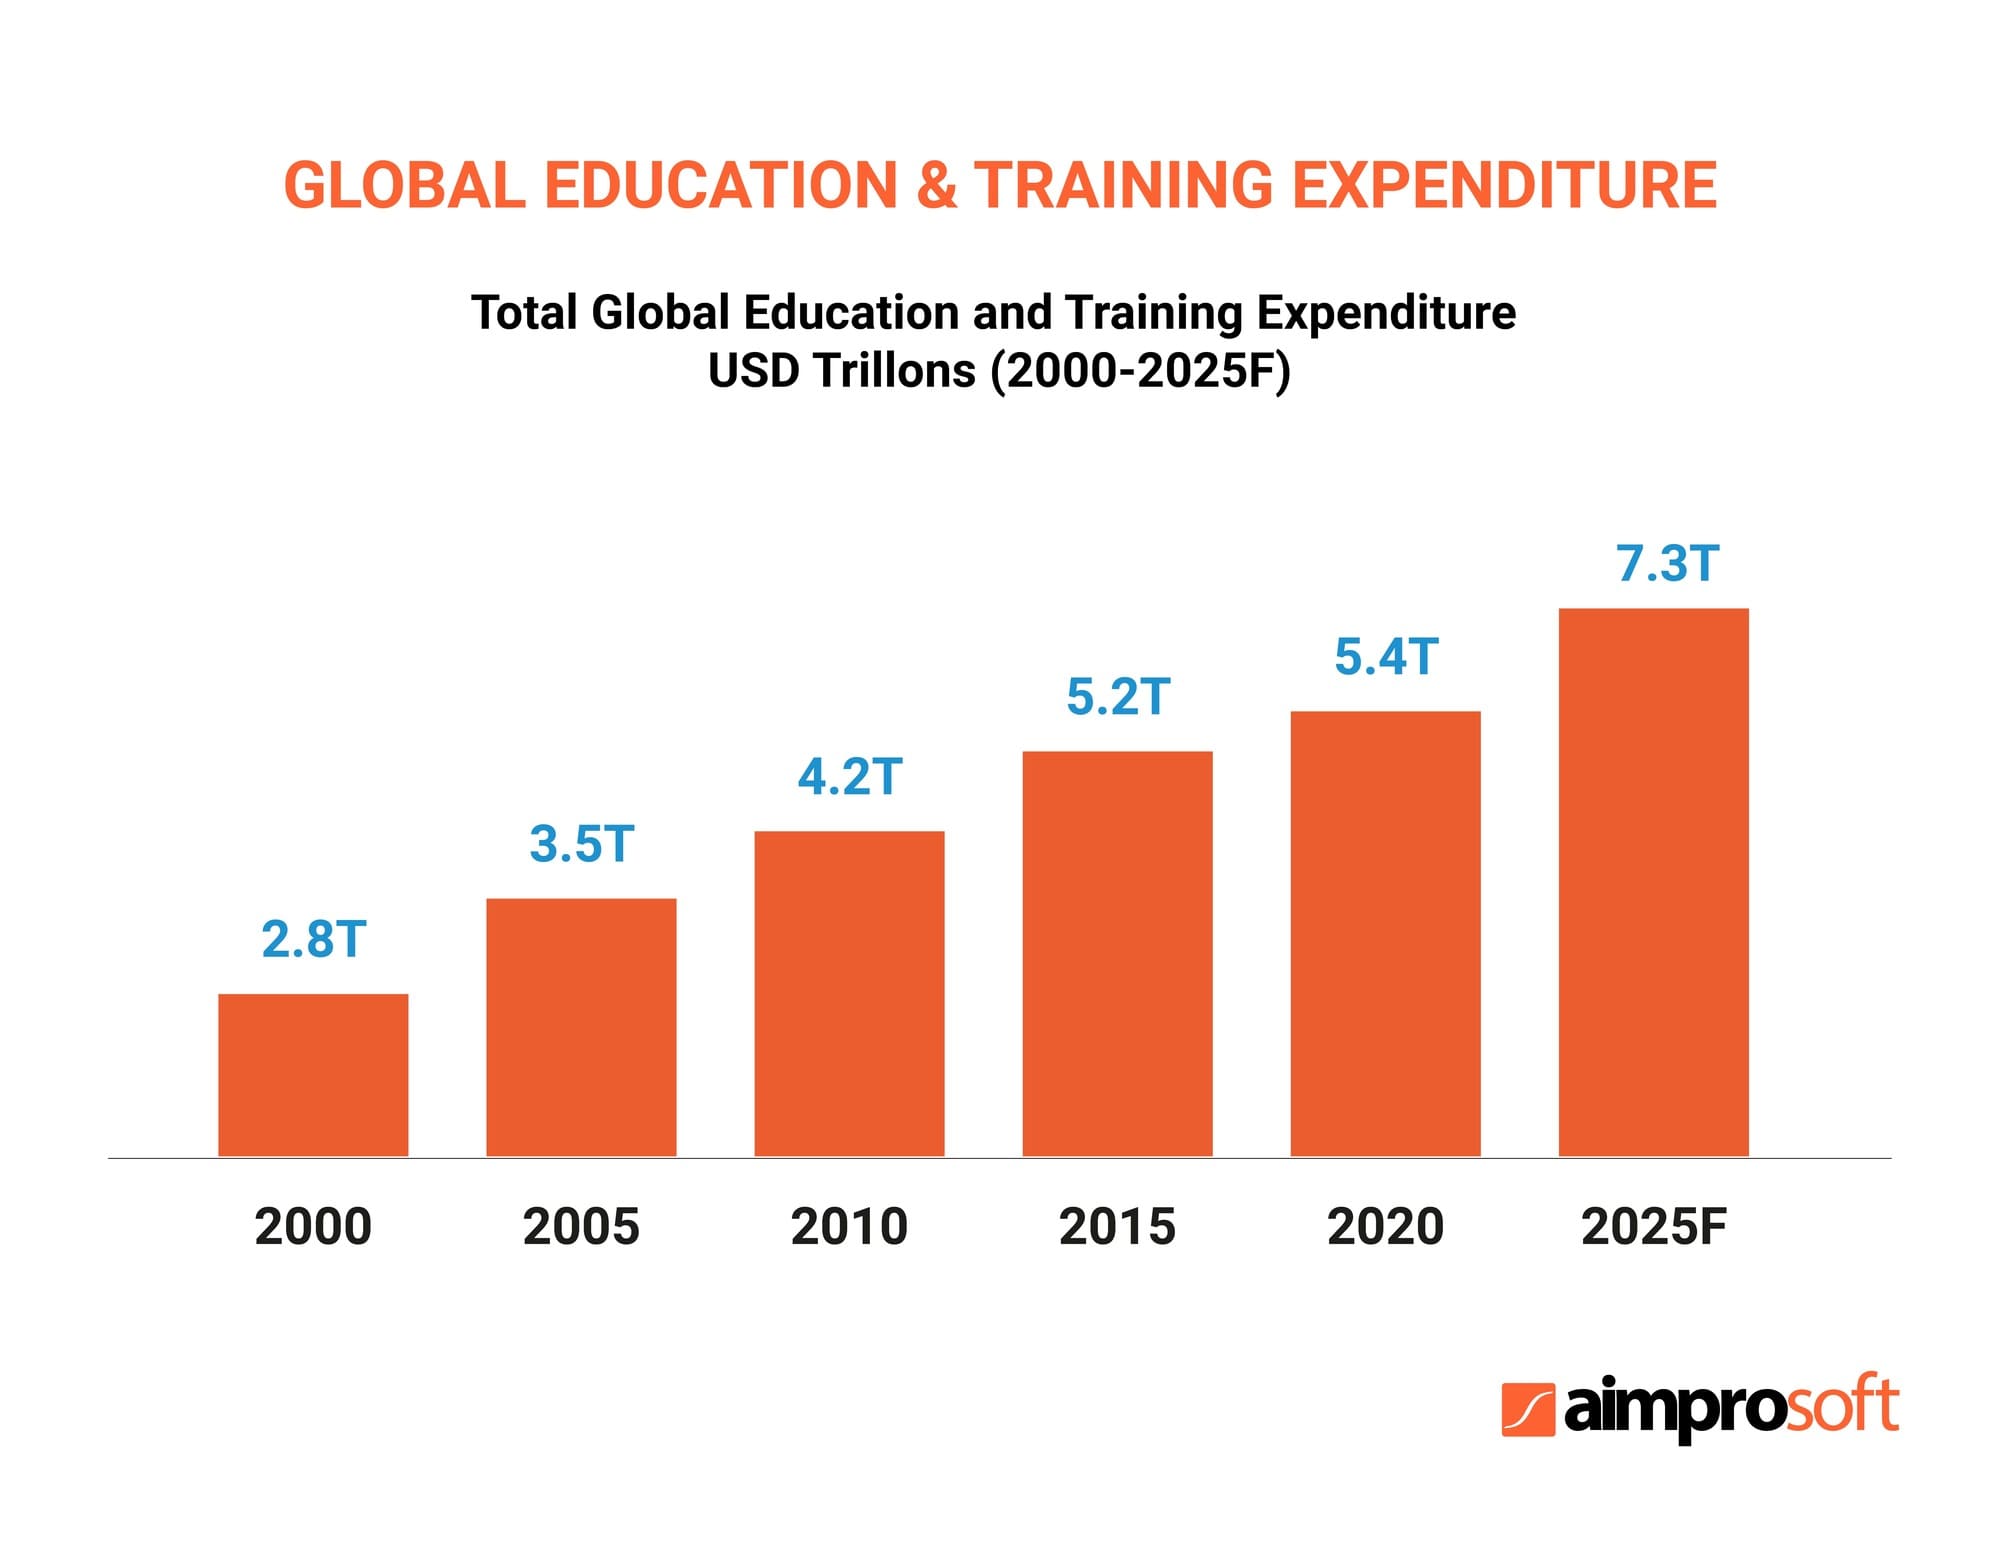 If want to start an edtech company, it's high time because the global expenditure in the educational sector is growing